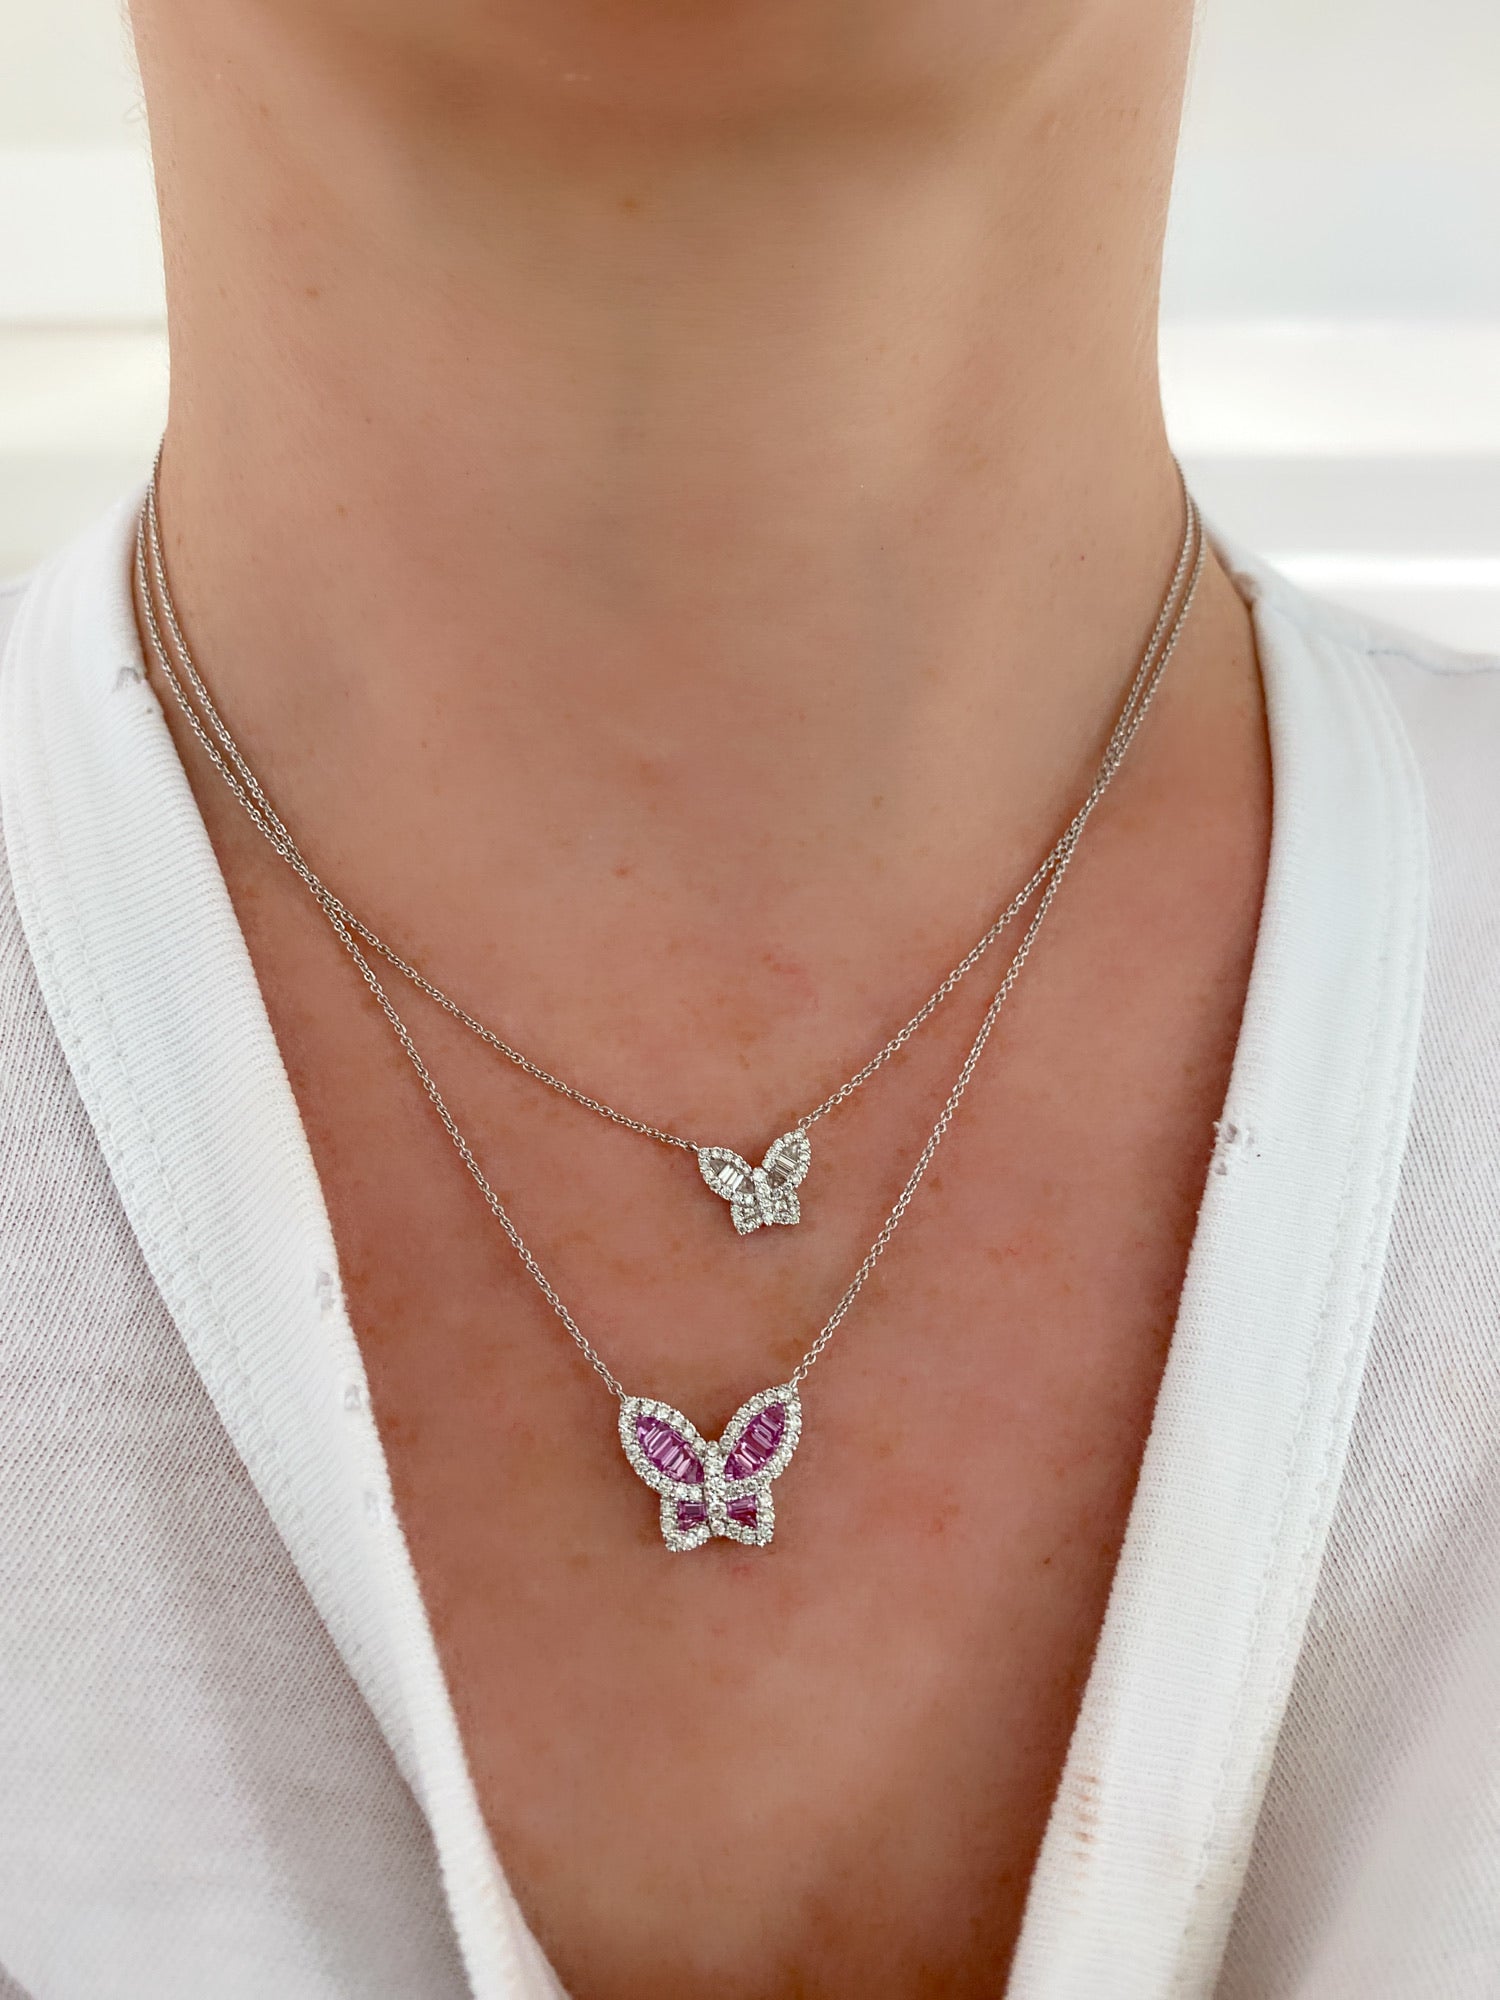 Large Pink Sapphire and Diamond Butterfly Pendant – Nicole Rose